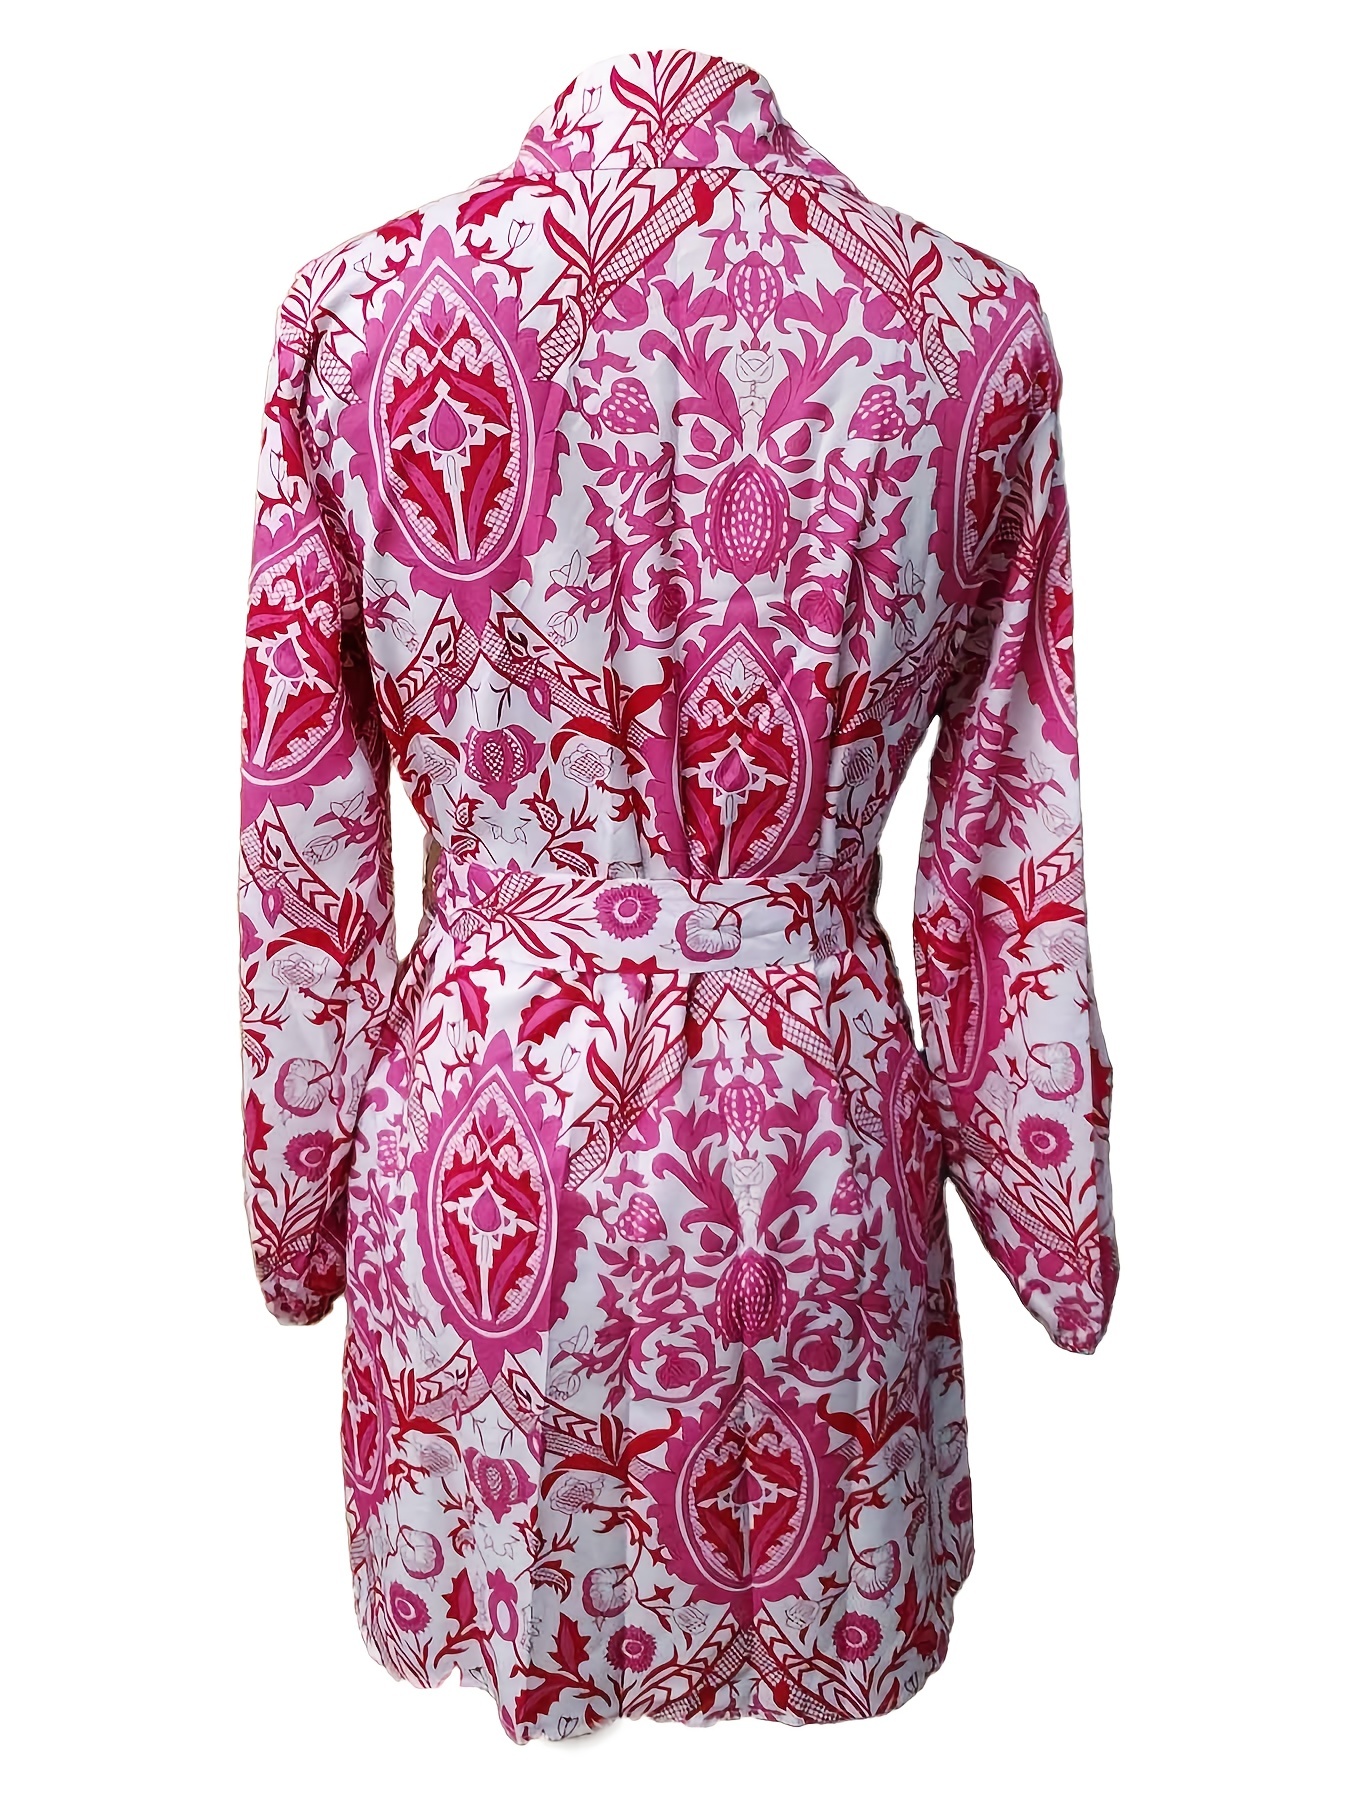 ethnic floral print dress casual button front long sleeve dress womens clothing